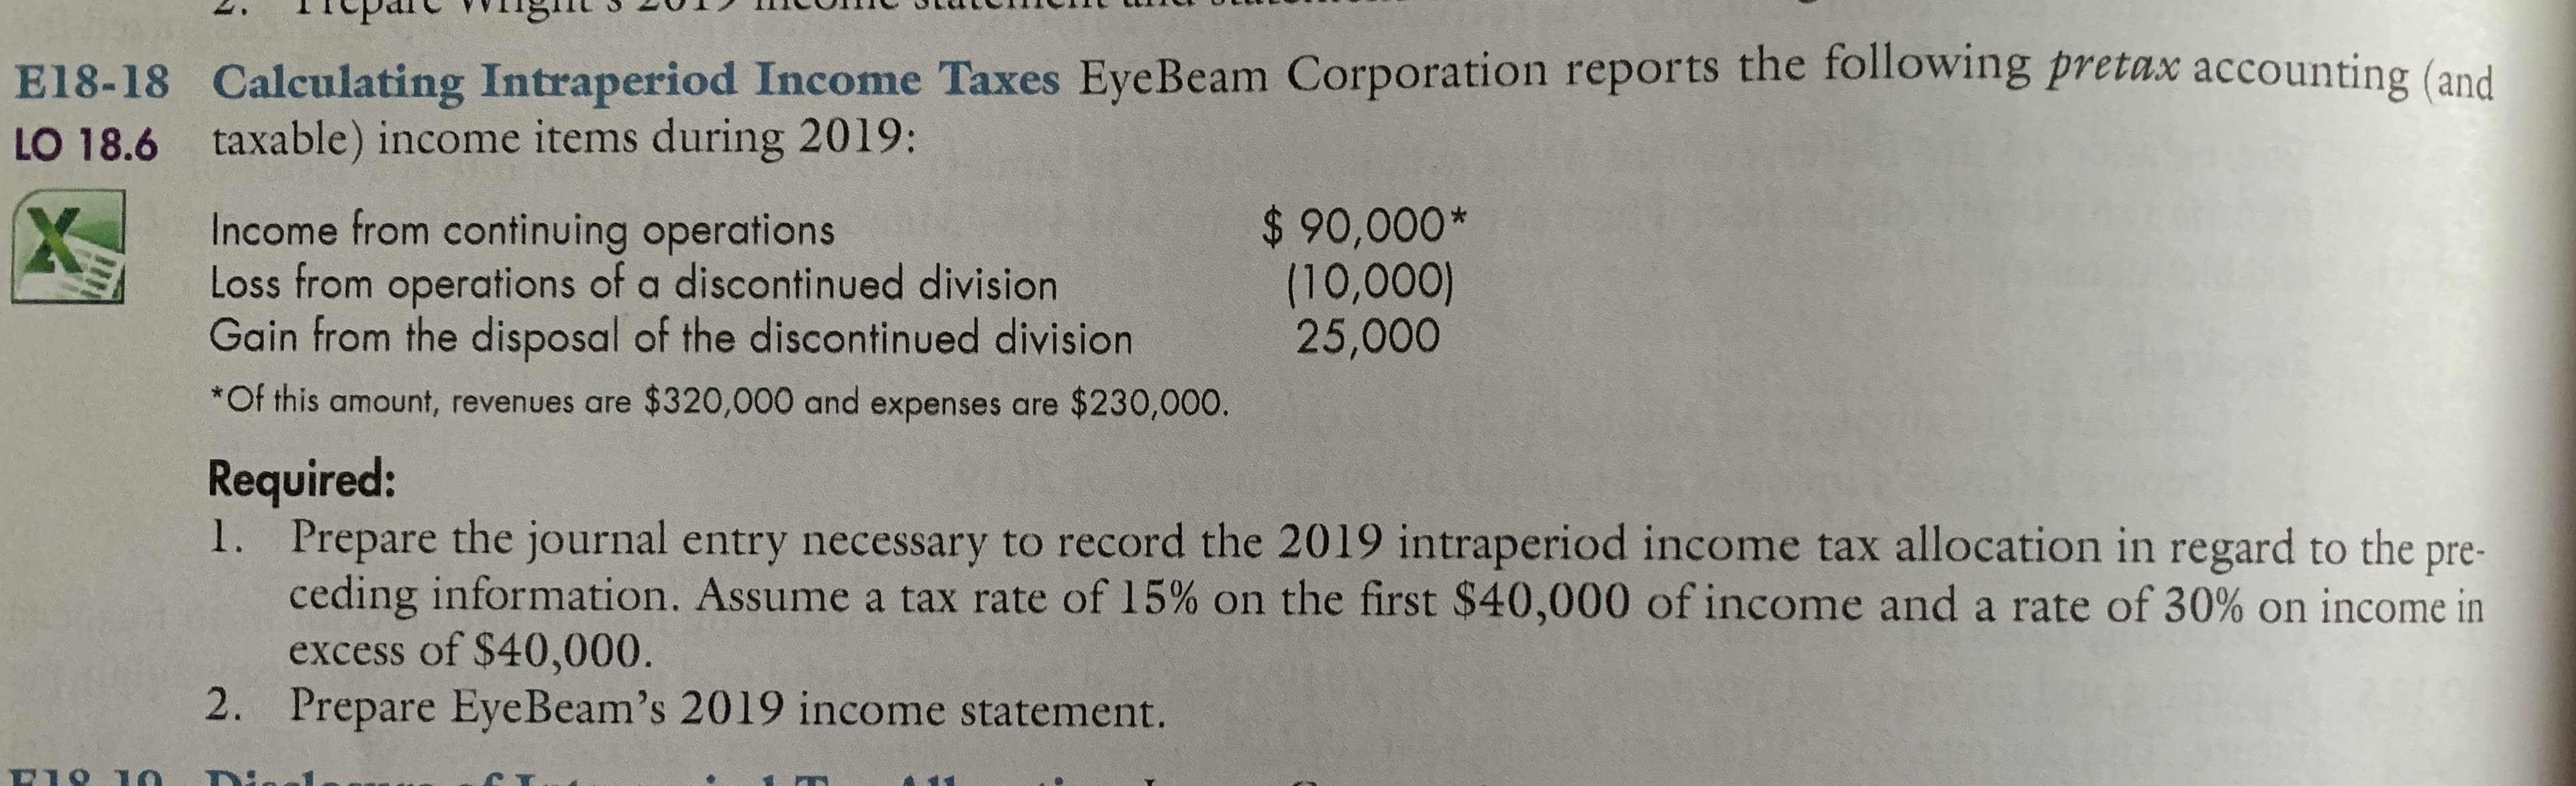 Tiepare vVITgm
E18-18 Calculating Intraperiod Income Taxes EyeBeam Corporation reports the following pretax accounting (and
LO 18.6
taxable) income items during 2019:
Income from continuing operations
Loss from operations of a discontinued division
Gain from the disposal of the discontinued division
$ 90,000*
(10,000)
25,000
*Of this amount, revenues are $320,000 and expenses are $230,000.
Required:
1. Prepare the journal entry necessary to record the 2019 intraperiod income tax allocation in regard to the pre-
ceding information. Assume a tax rate of 15% on the first $40,000 of income and a rate of 30% on income in
excess of $40,000.
Prepare EyeBeam's 2019 income statement.
2.
